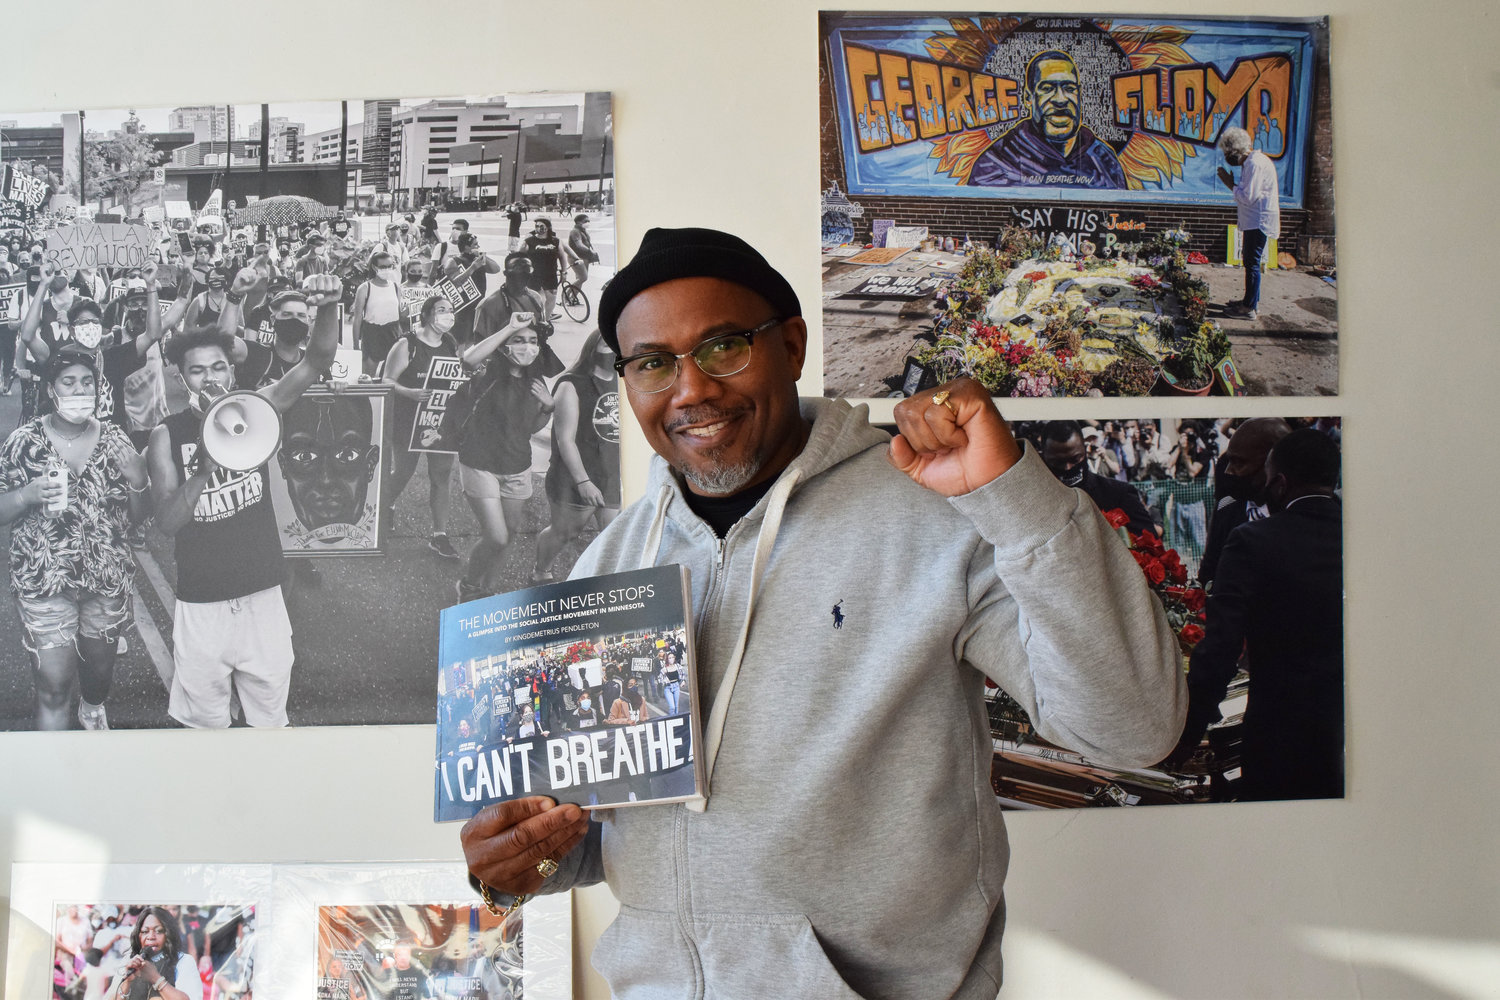 Award-winning independent journalist and photographer KingDemetrius Pendleton poses inside Wing Young Huie’s The Third Place Gallery at 3730 Chicago Ave., where his exhibition “The Movement Never Stops” is on display. The exhibition includes photographs Pendleton has taken from the front lines of the social justice movement in the Twin Cities over the past seven years.